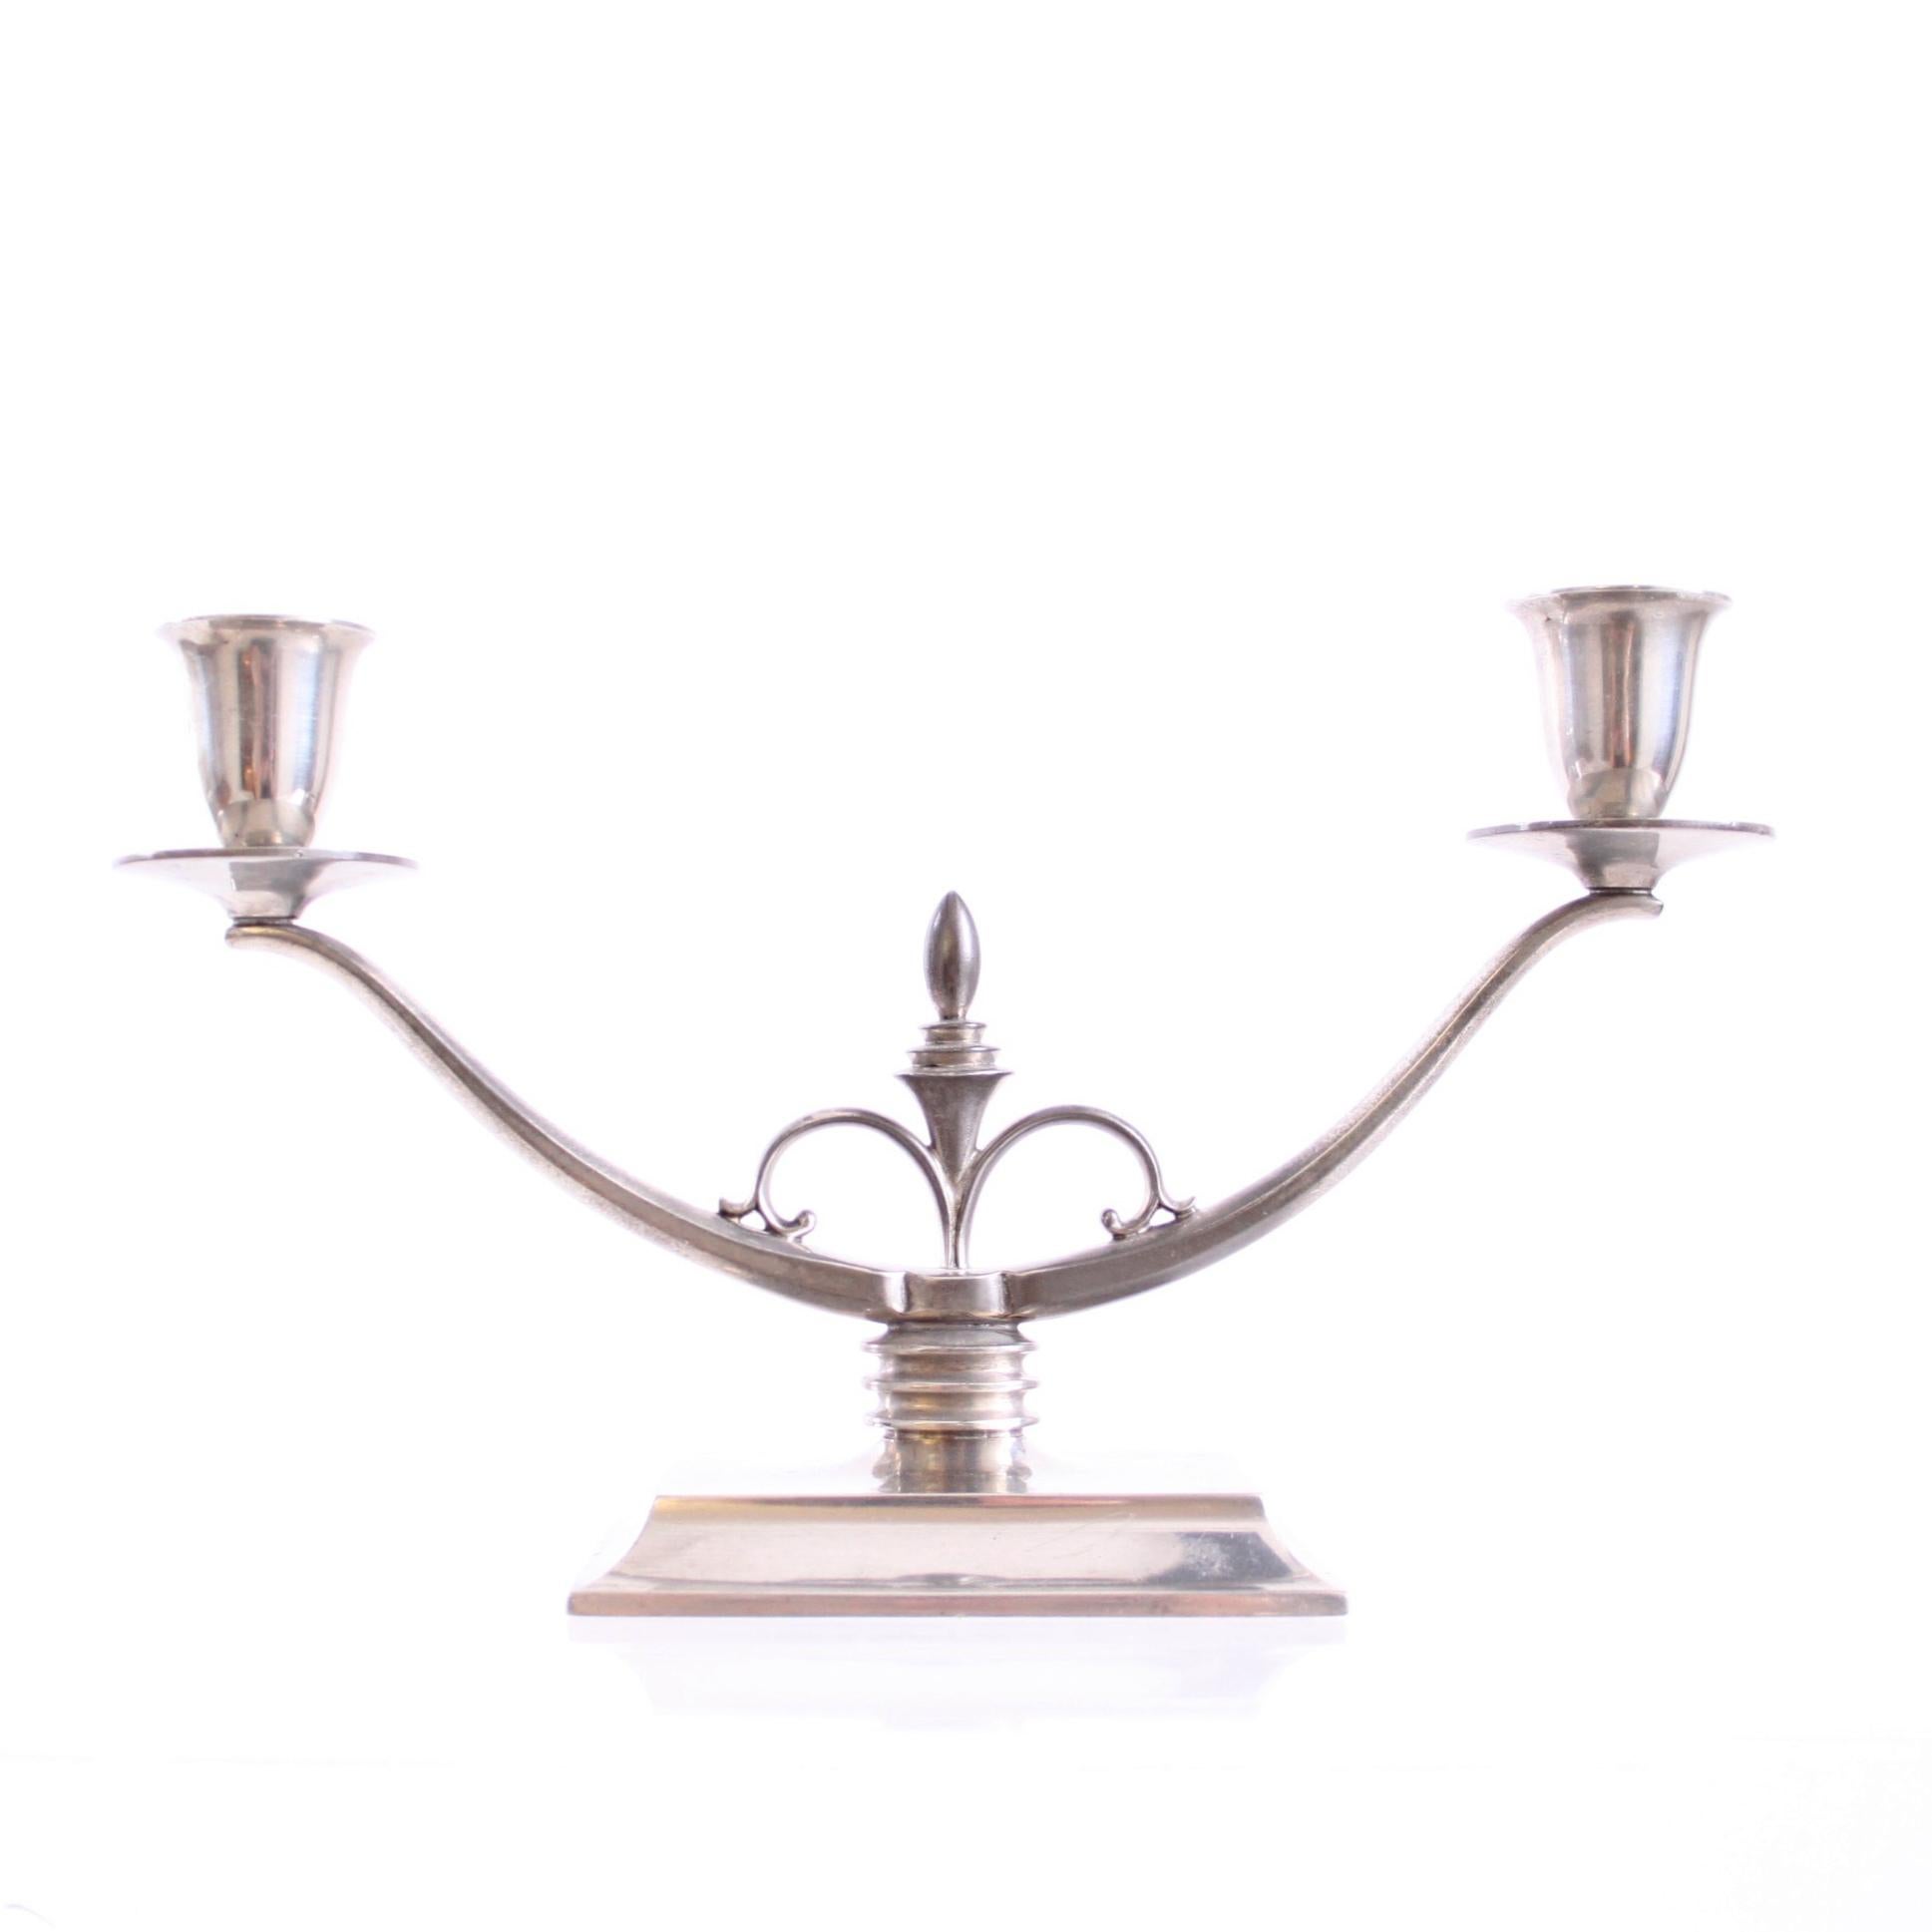 Just Andersen - Scandinavian Modern

A sculptural Just Andersen candelabra model 1453, two-armed, rectangular footed, in matte pewter.

Manufactured in Denmark 1933-35, stamped JUST 1453.

Excellent vintage condition and a beautiful